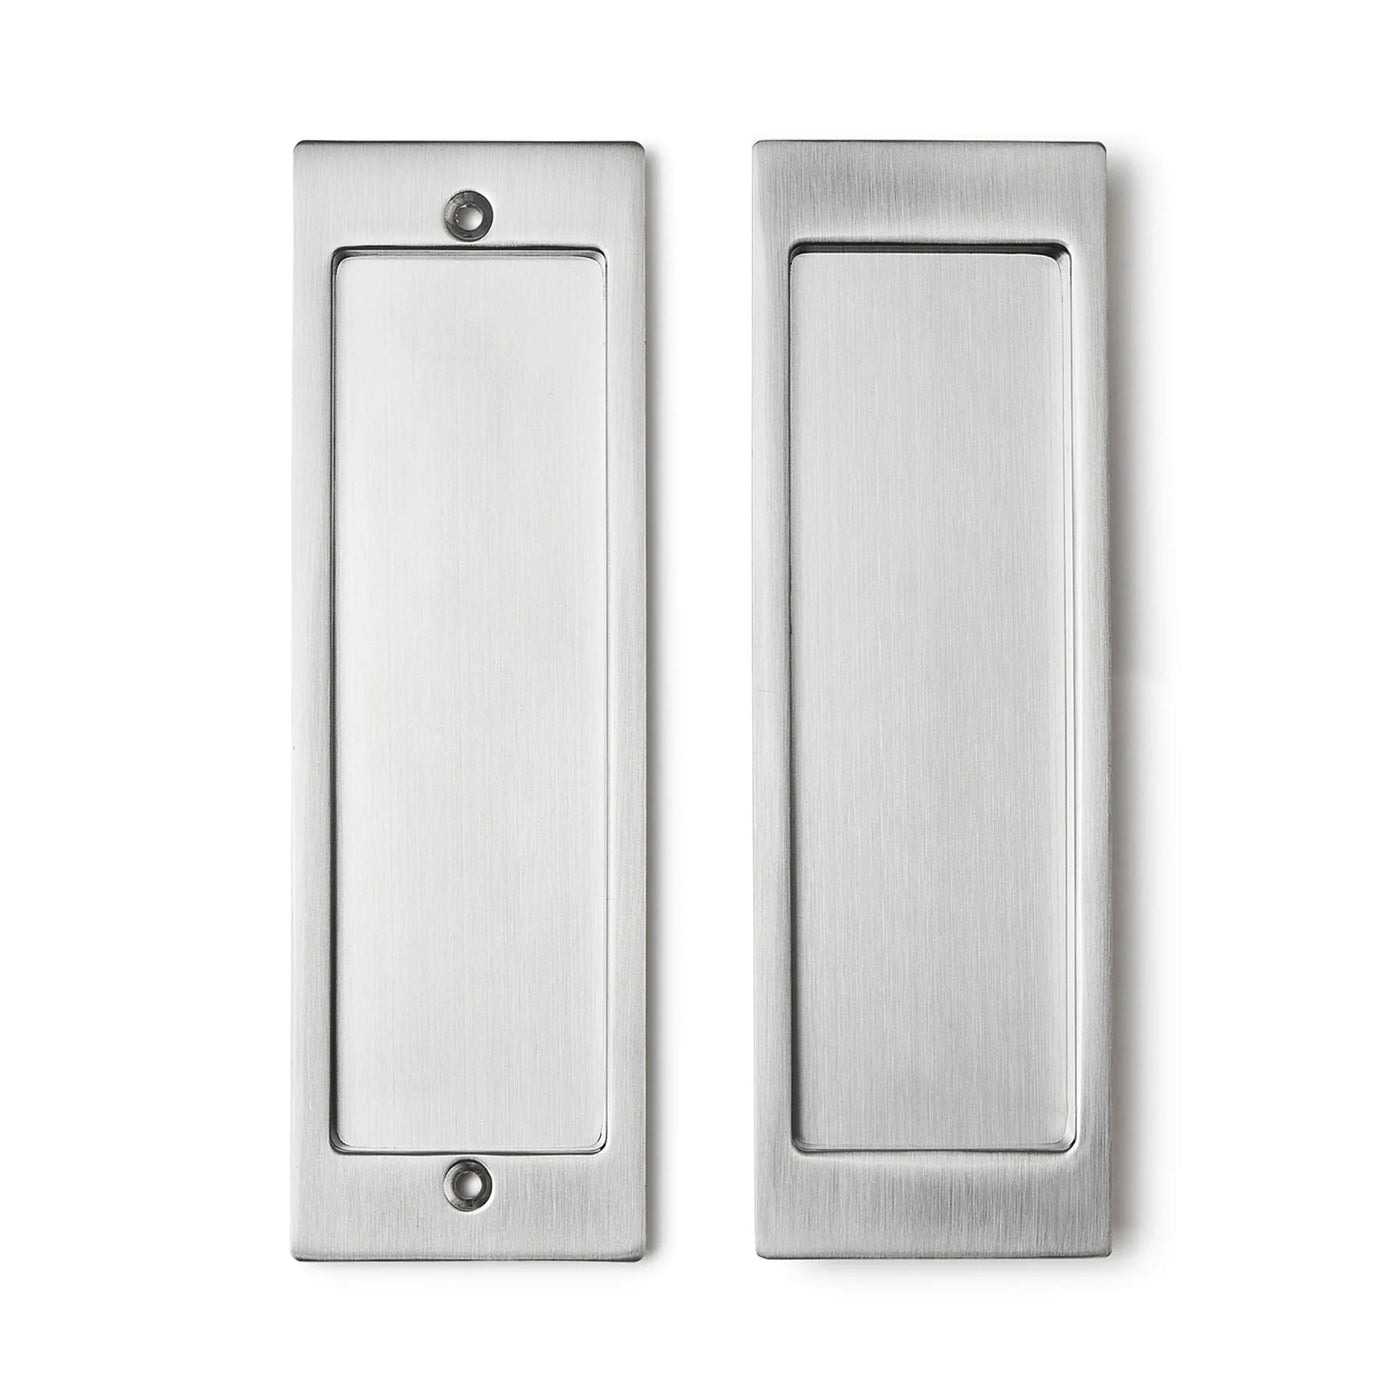 A pair of AHI Explore Pocket Door Set Passage handles on a white background.